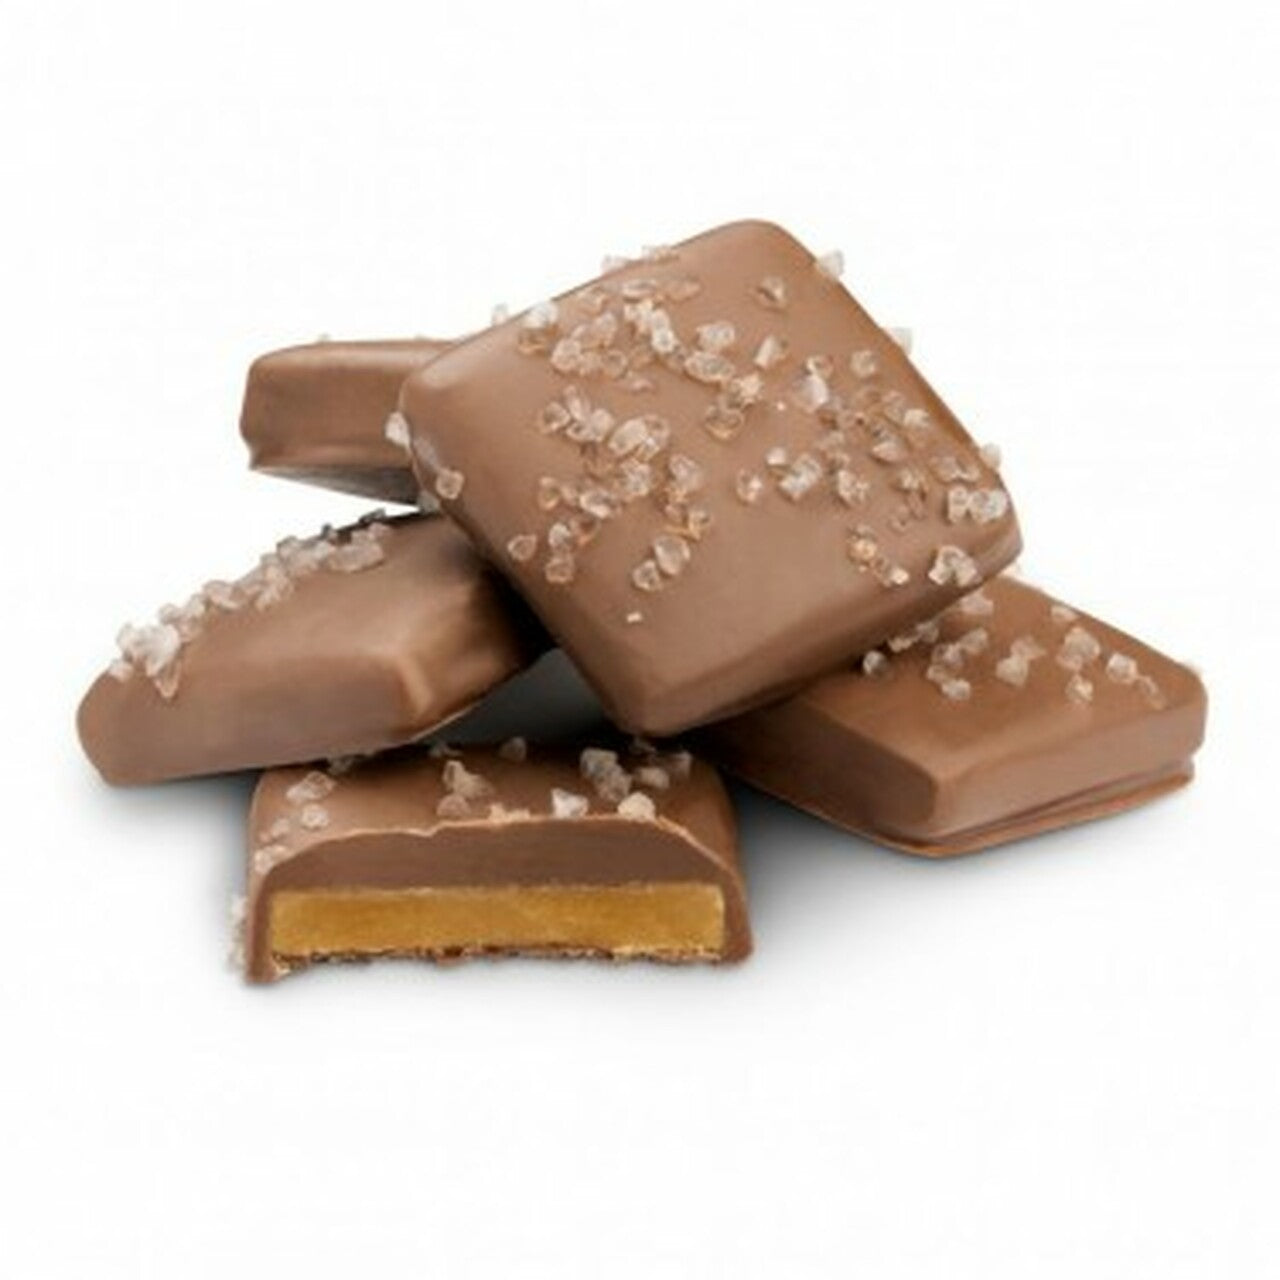 Milk Chocolate Royal Almond Butter Toffee with Sea Salt